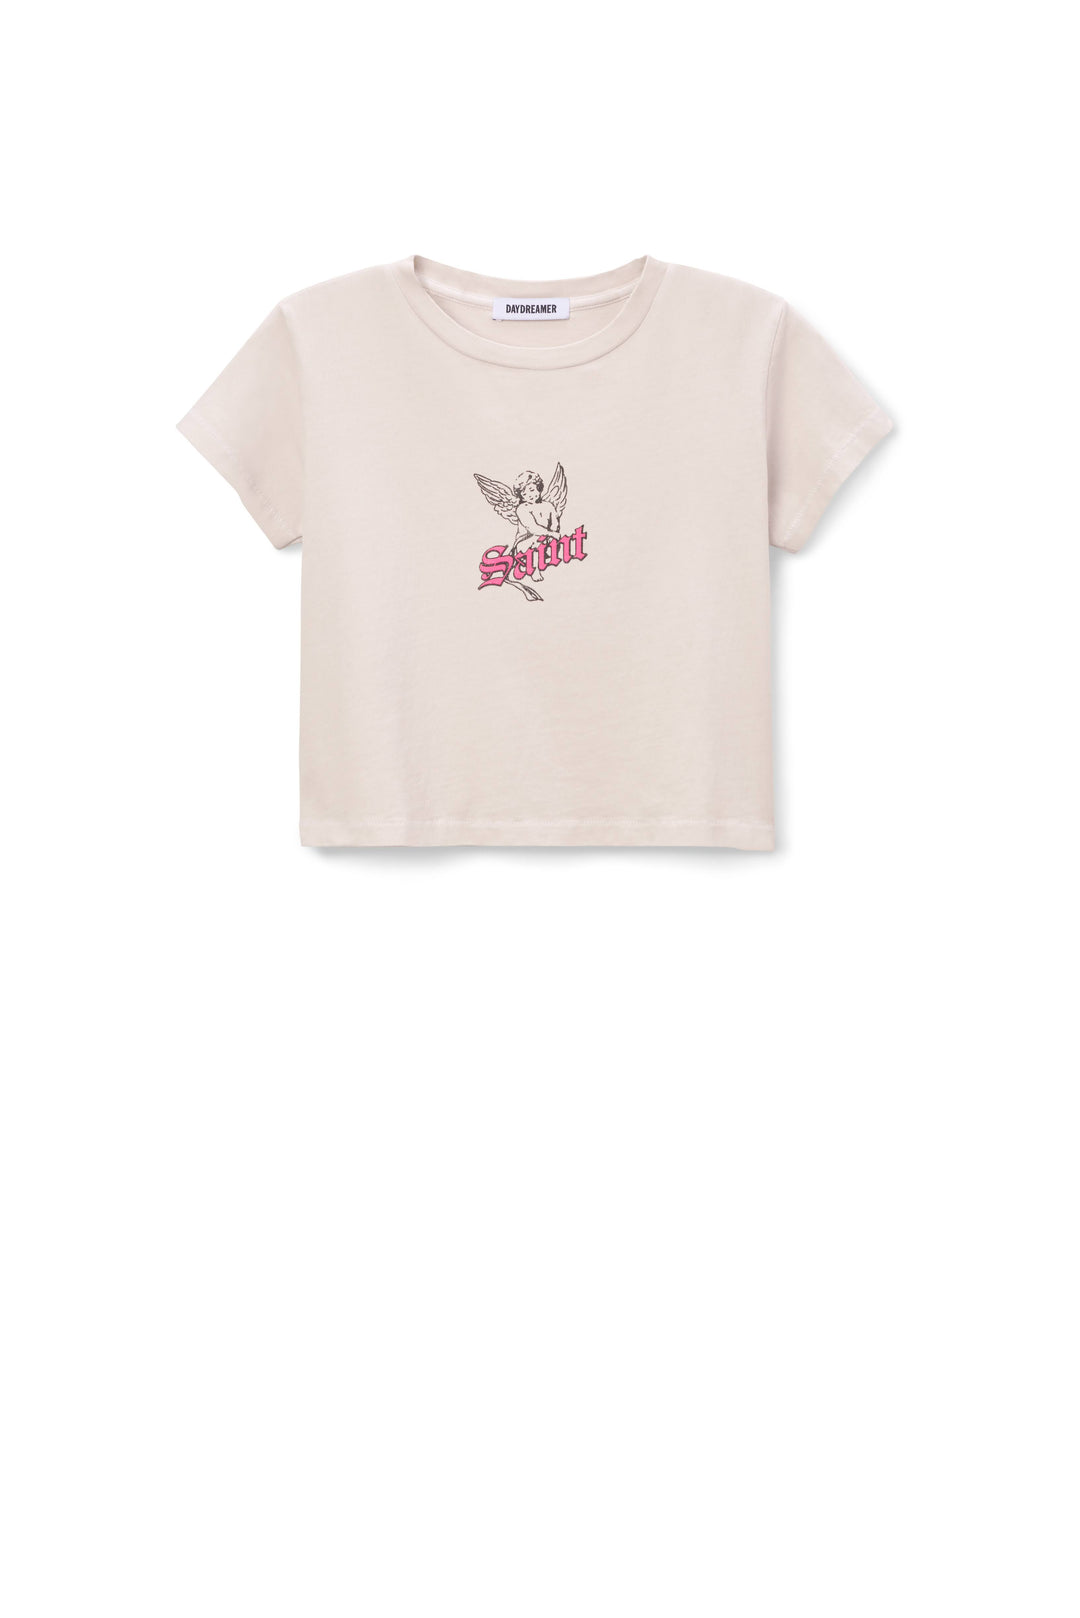 SAINT CAMP TEE-DIRTY WHITE - Kingfisher Road - Online Boutique